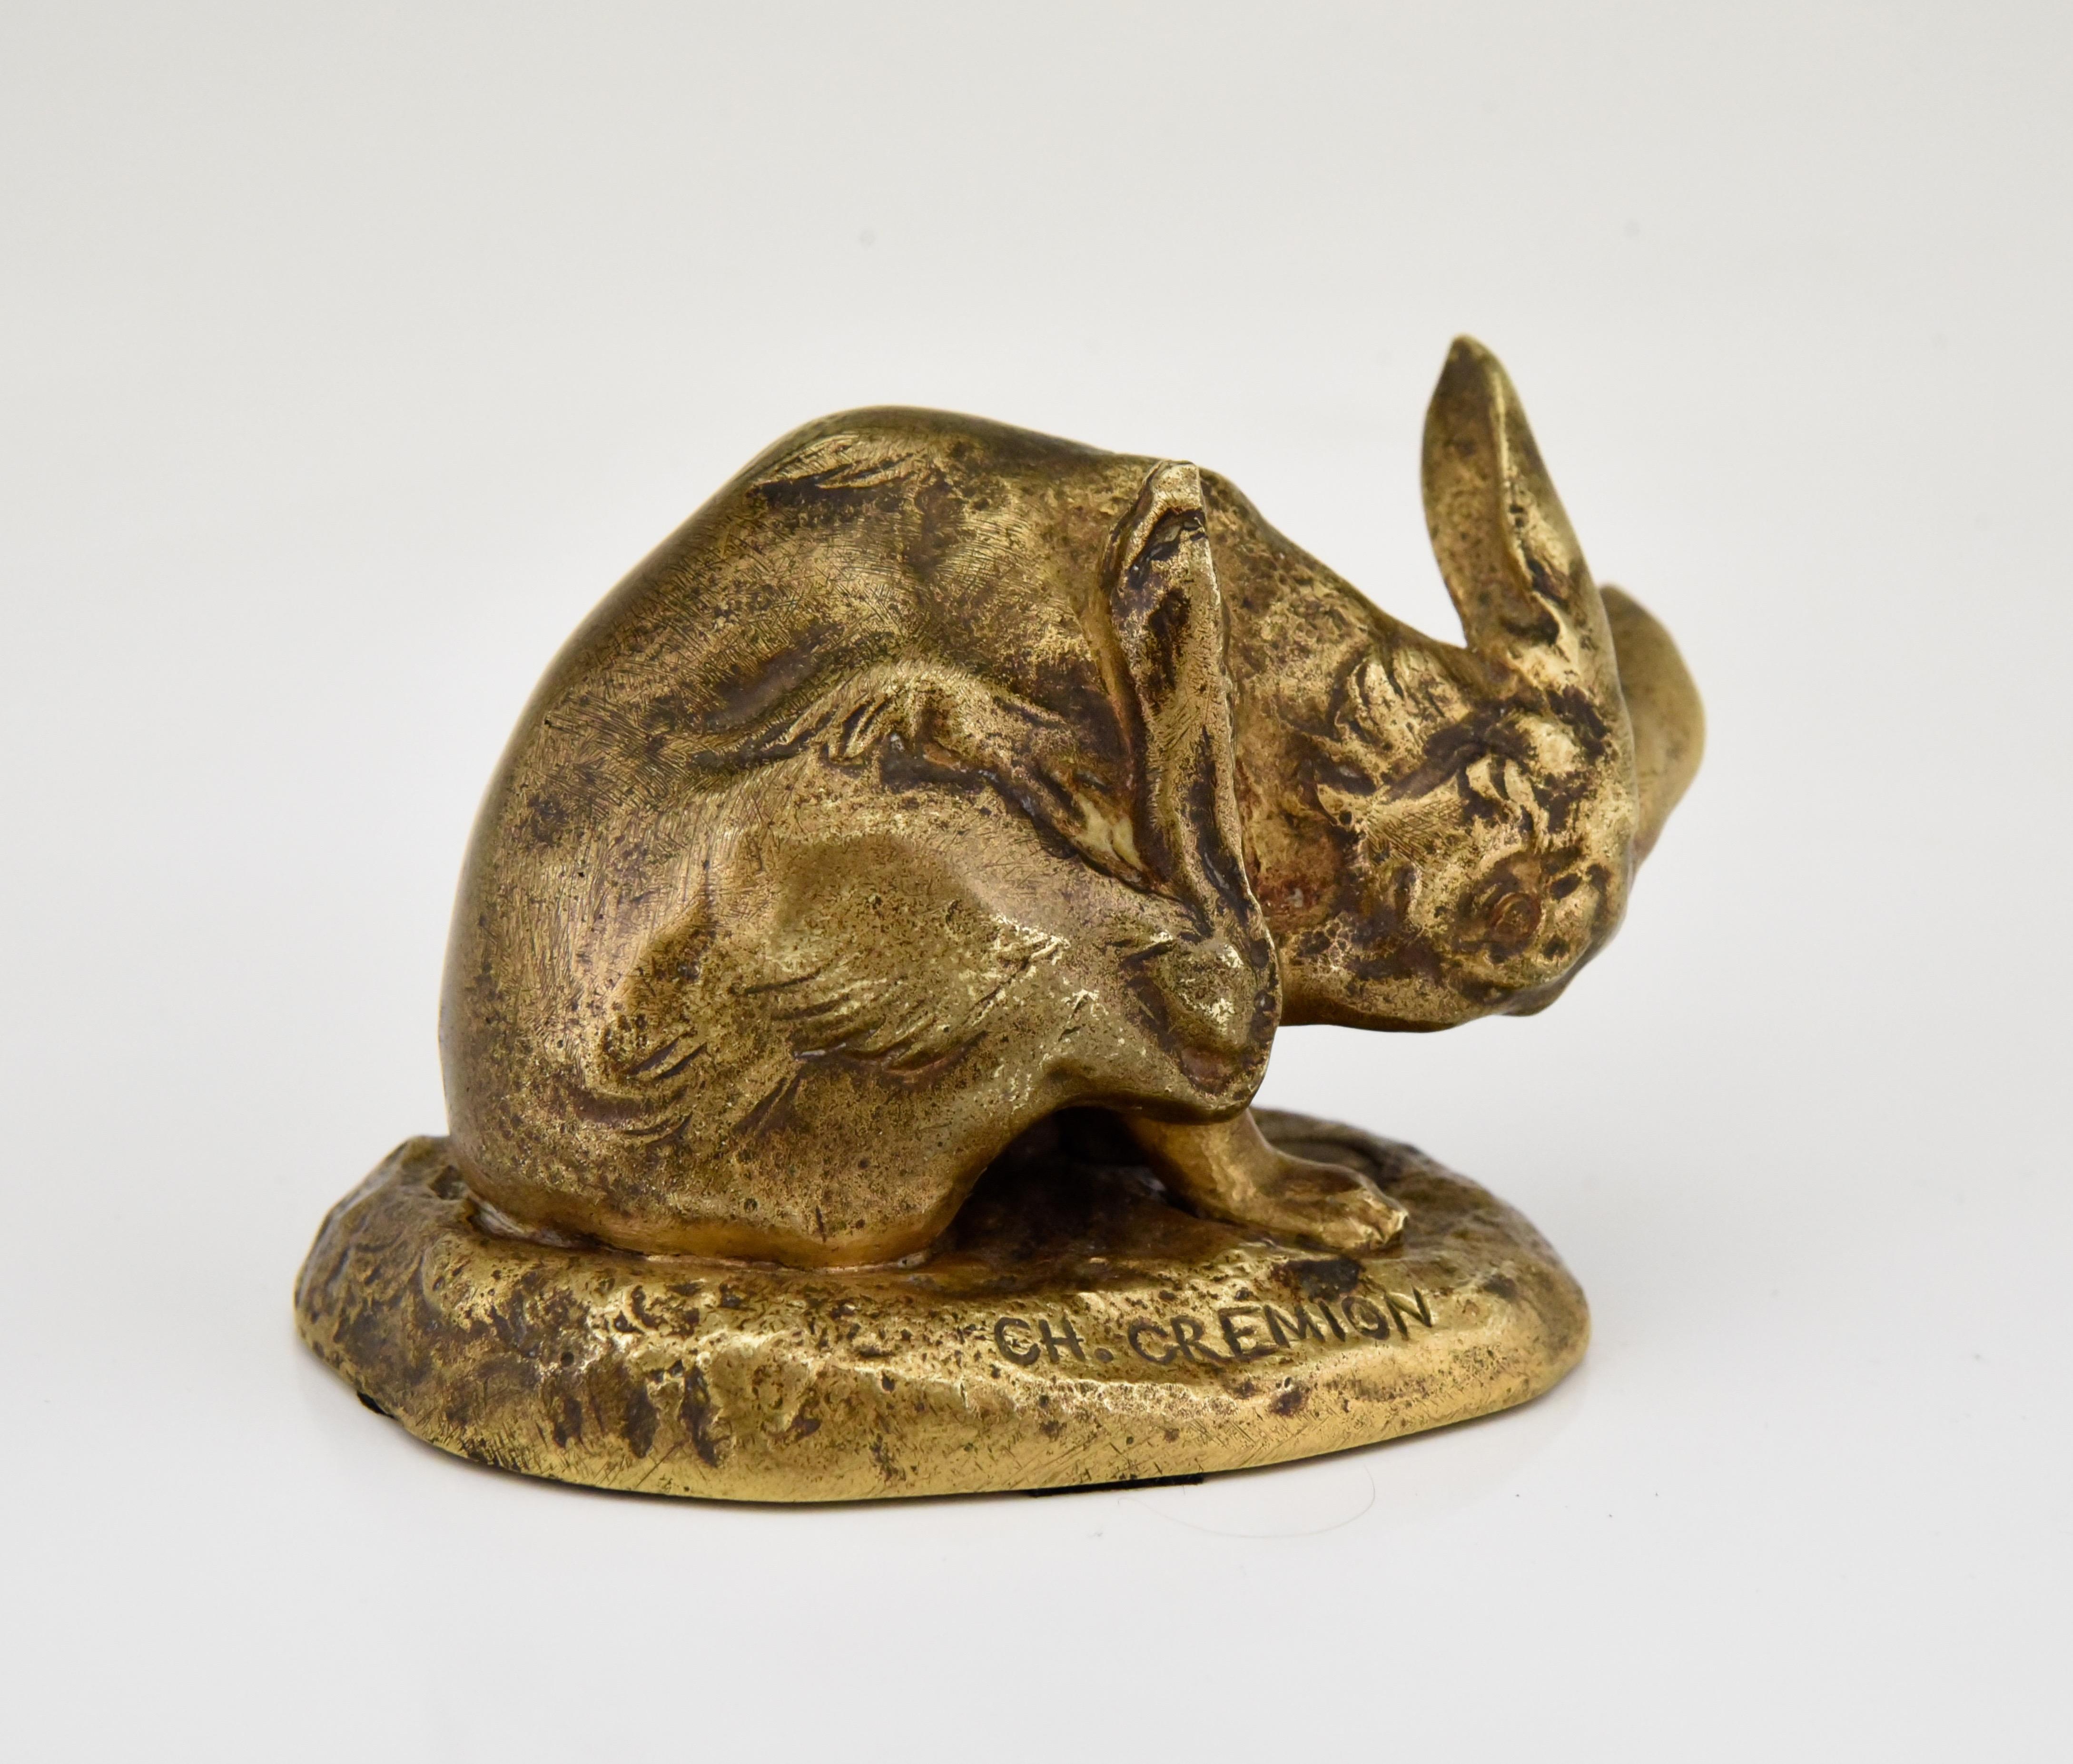 Cute antique bronze sculpture of a hare washing by the French artist Charles Gremion, France, 1900.